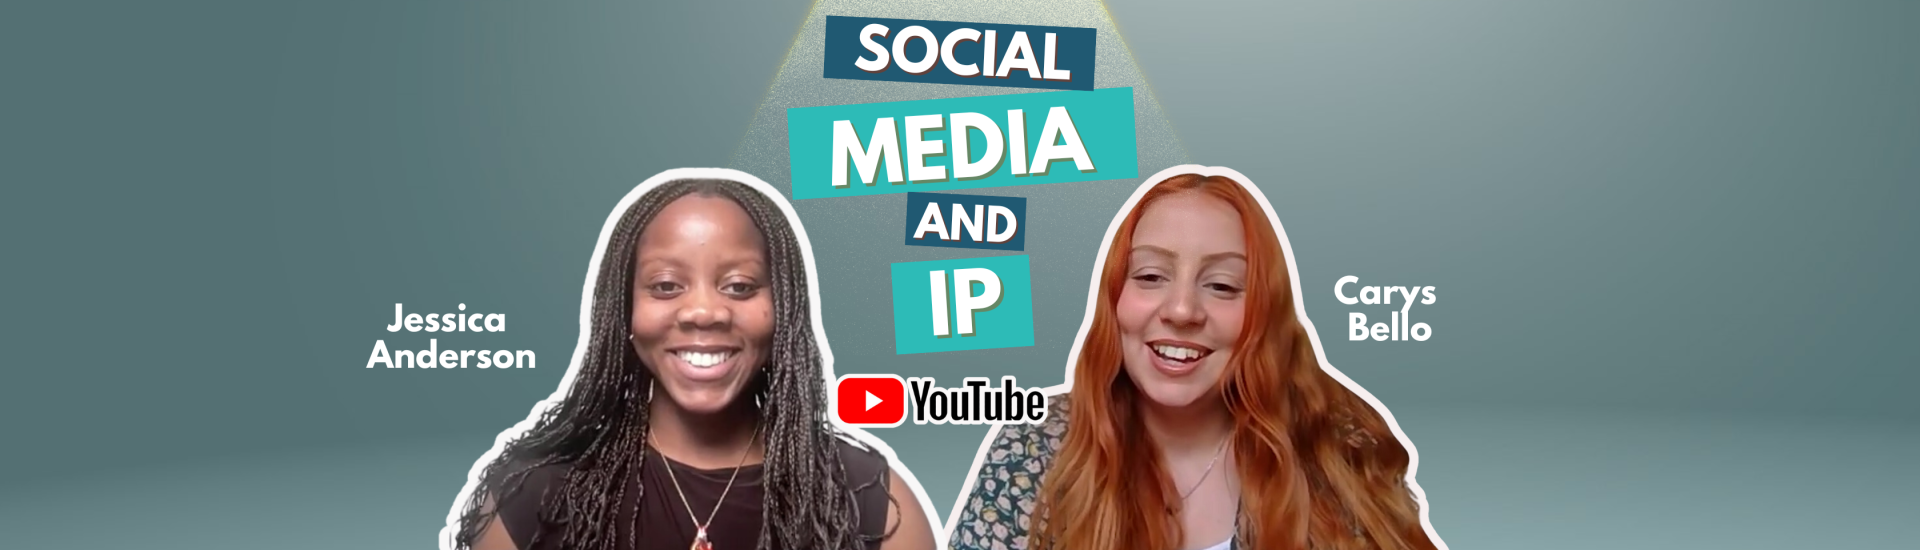 Social Media and IP Interview